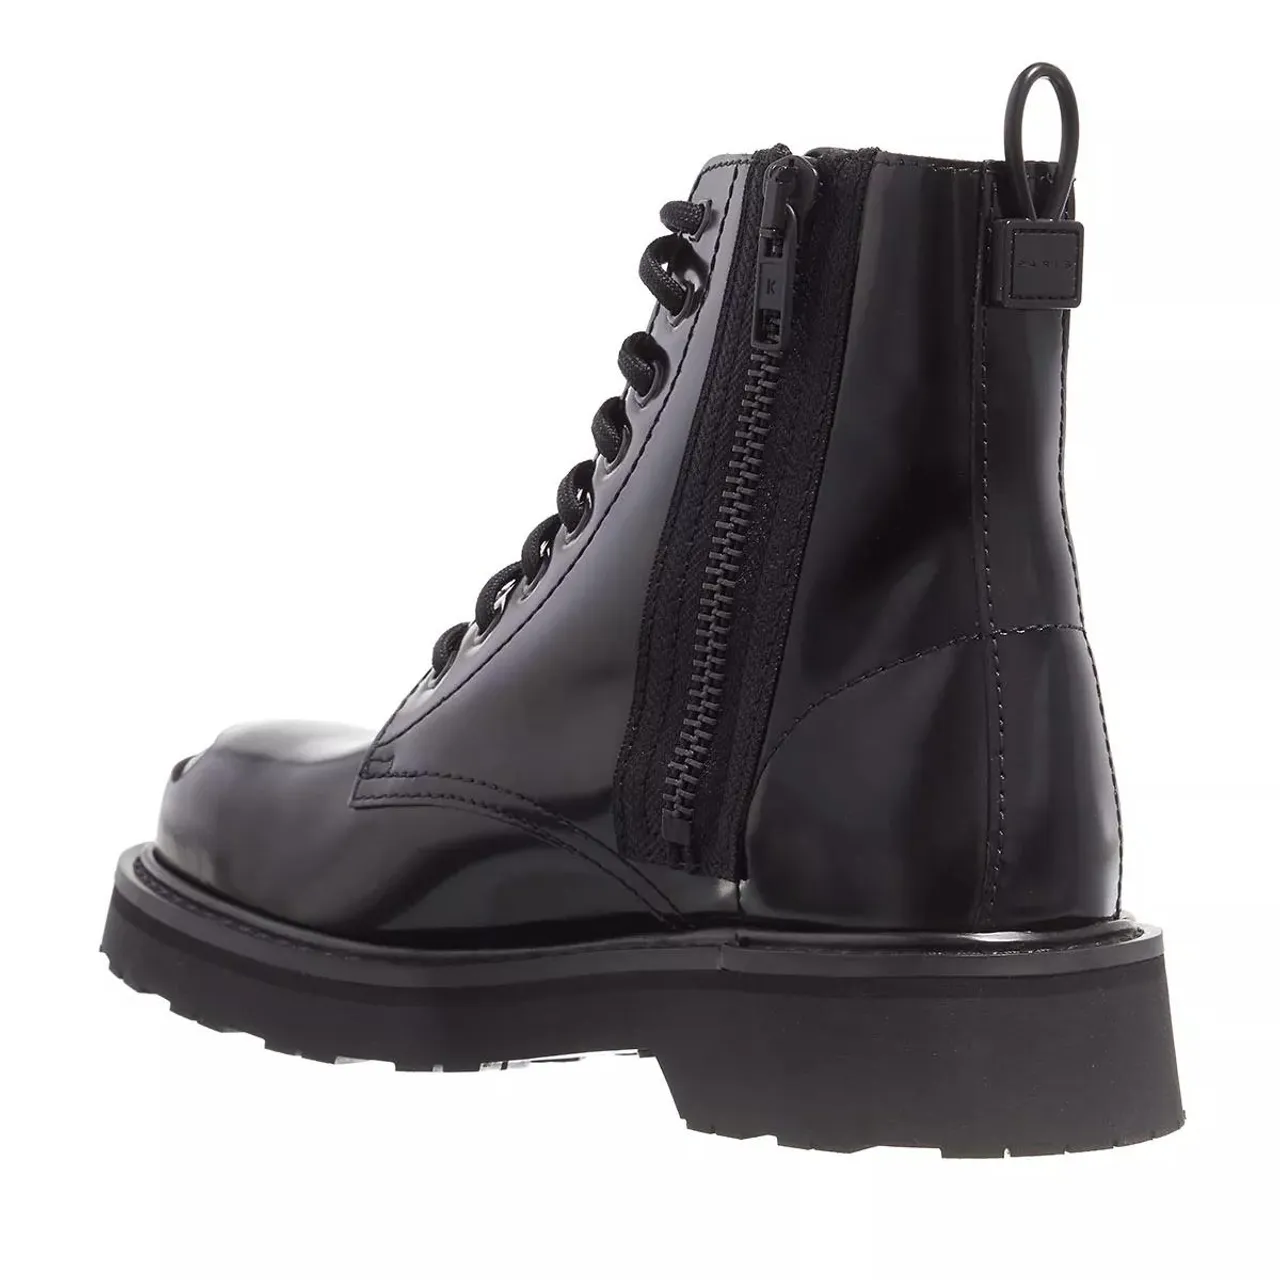 Kenzo Boots & Ankle Boots - Kenzosmile Lace-Up Boots - black - Boots & Ankle Boots for ladies